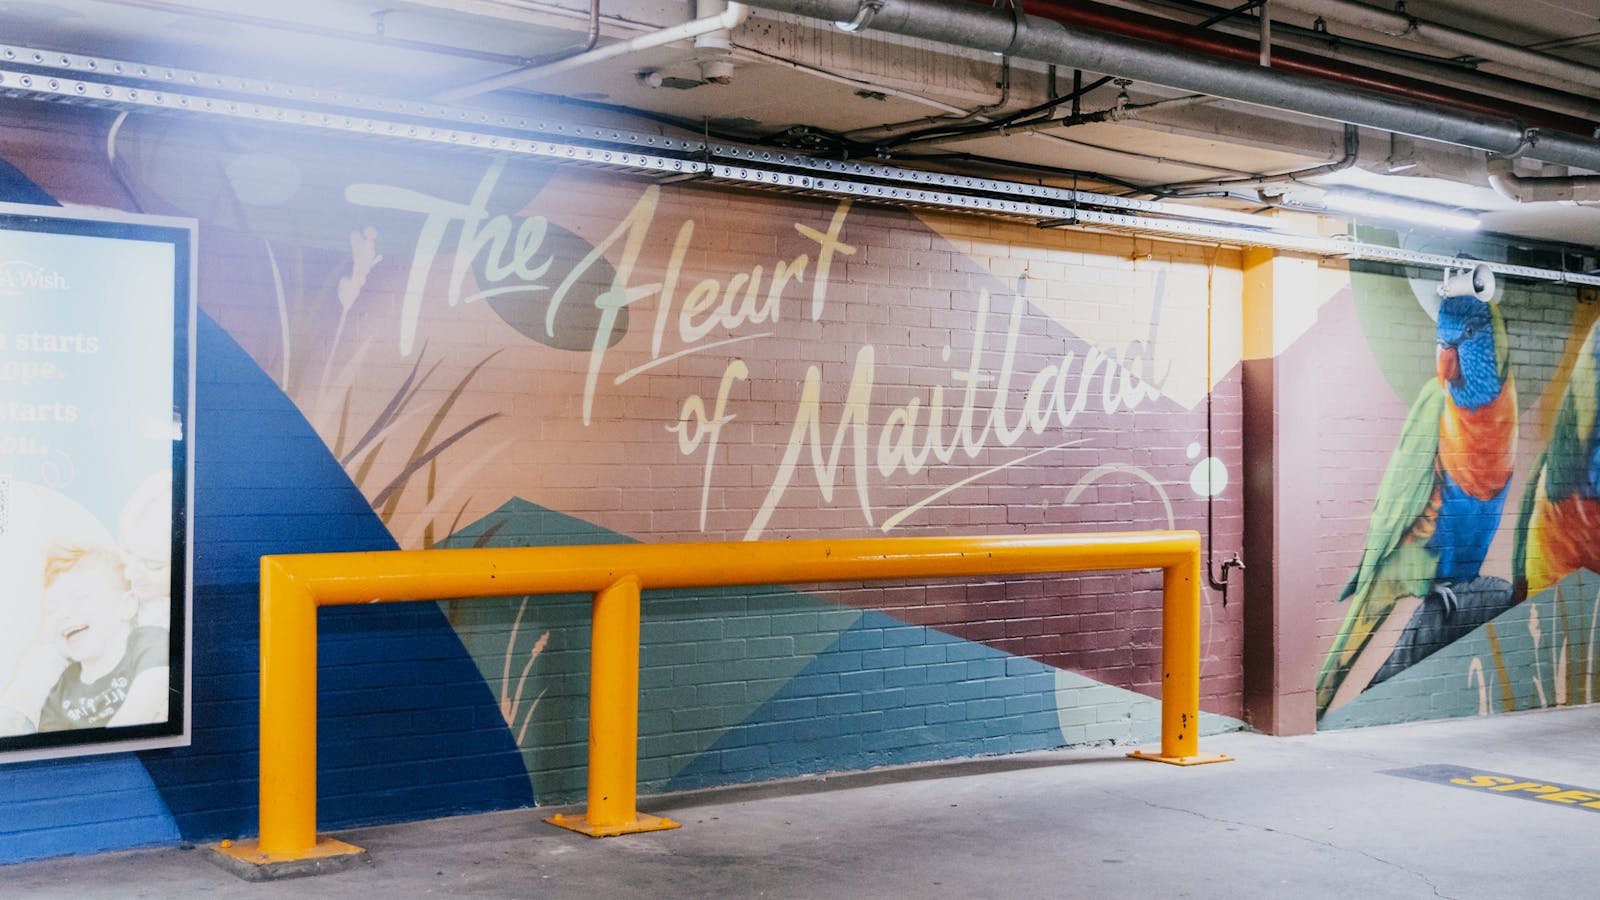 'The Heart of Maitland' Mural